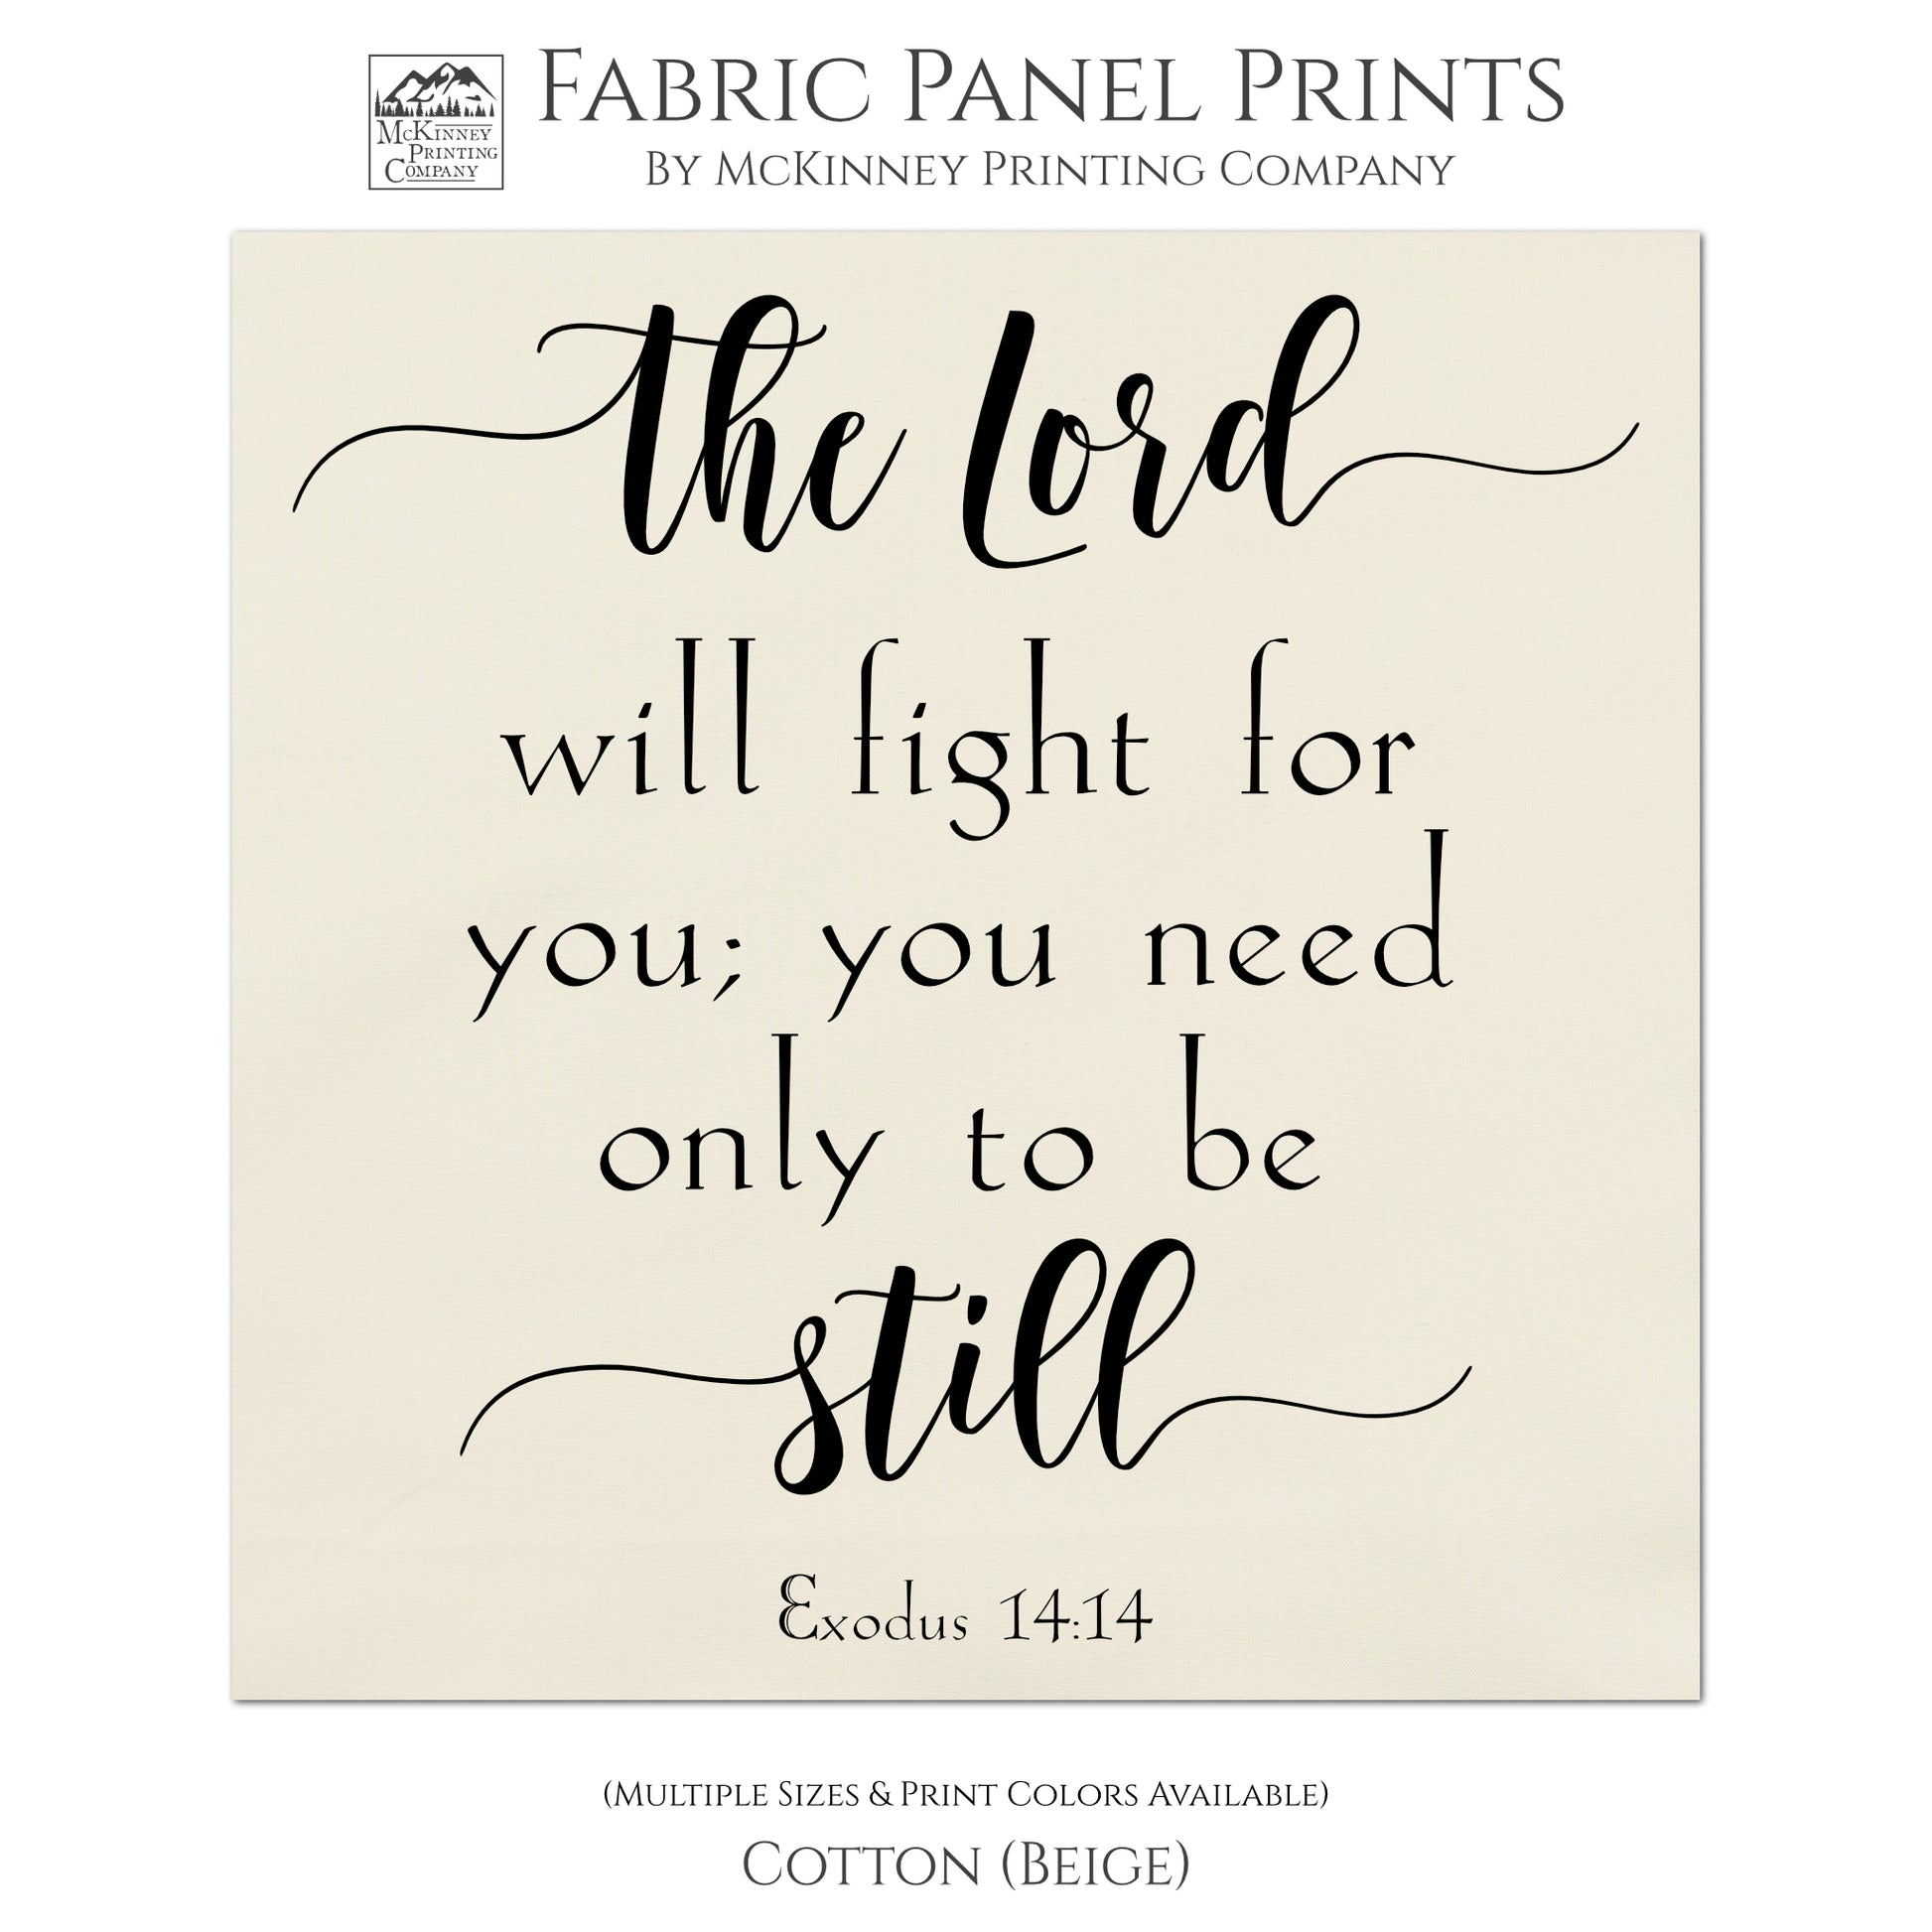 The Lord will fight for you; you need only to be still.  - Exodus 14 14, Scripture Fabric, Religious Fabric, Quilt Block, Fabric Panel, Craft Supplies, Sewing - Cotton